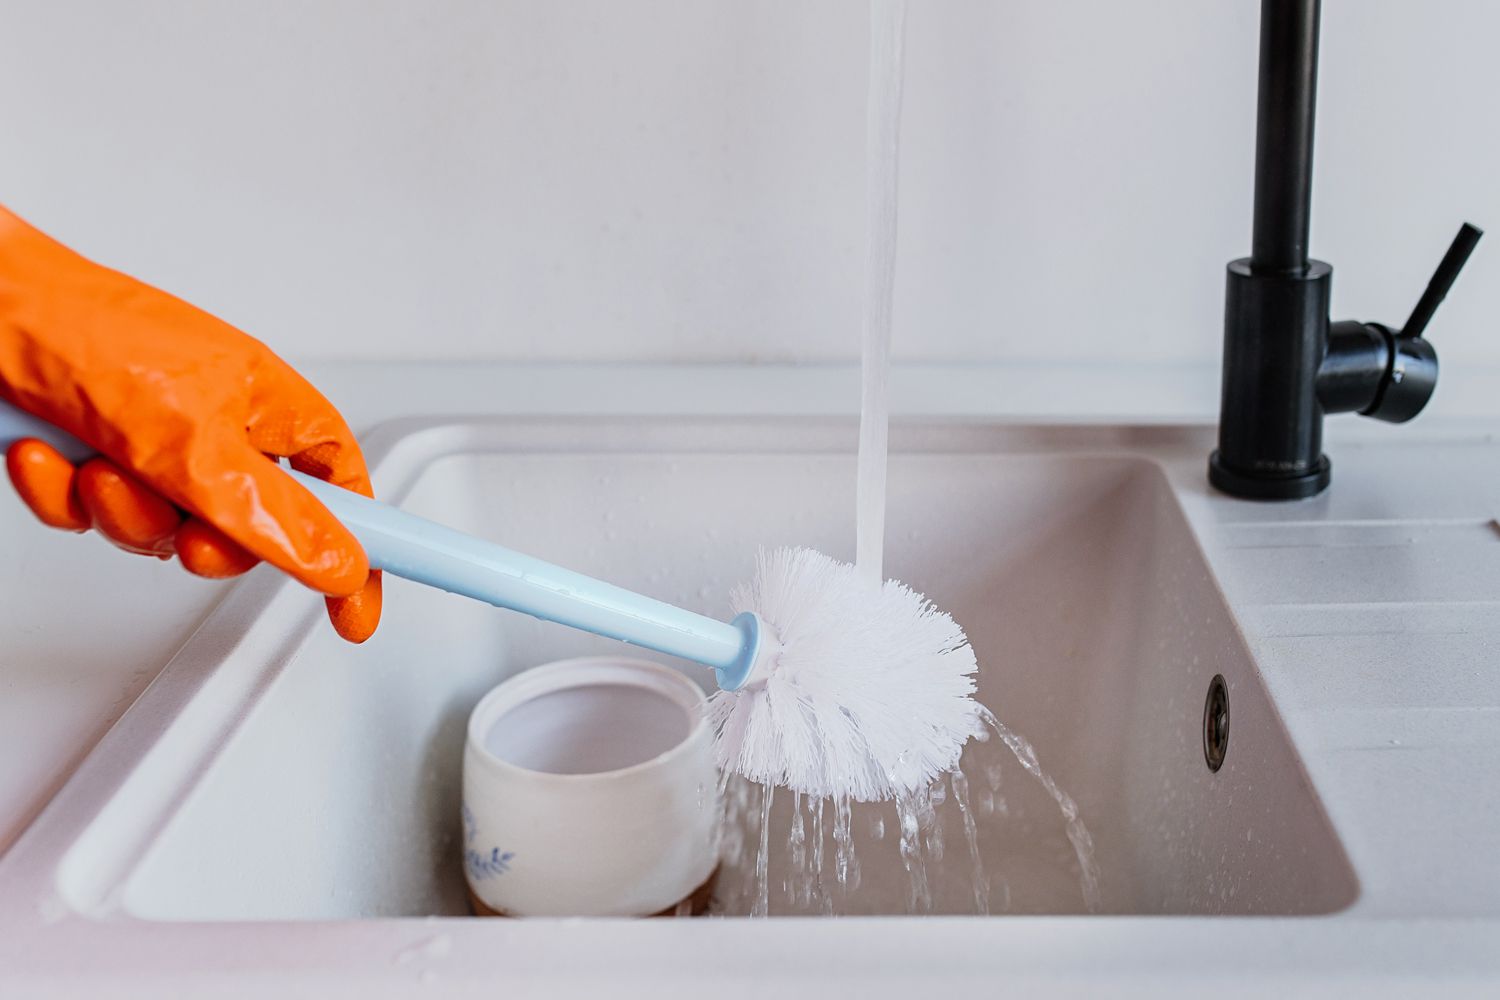 How To Clean A Plunger And Toilet Brush